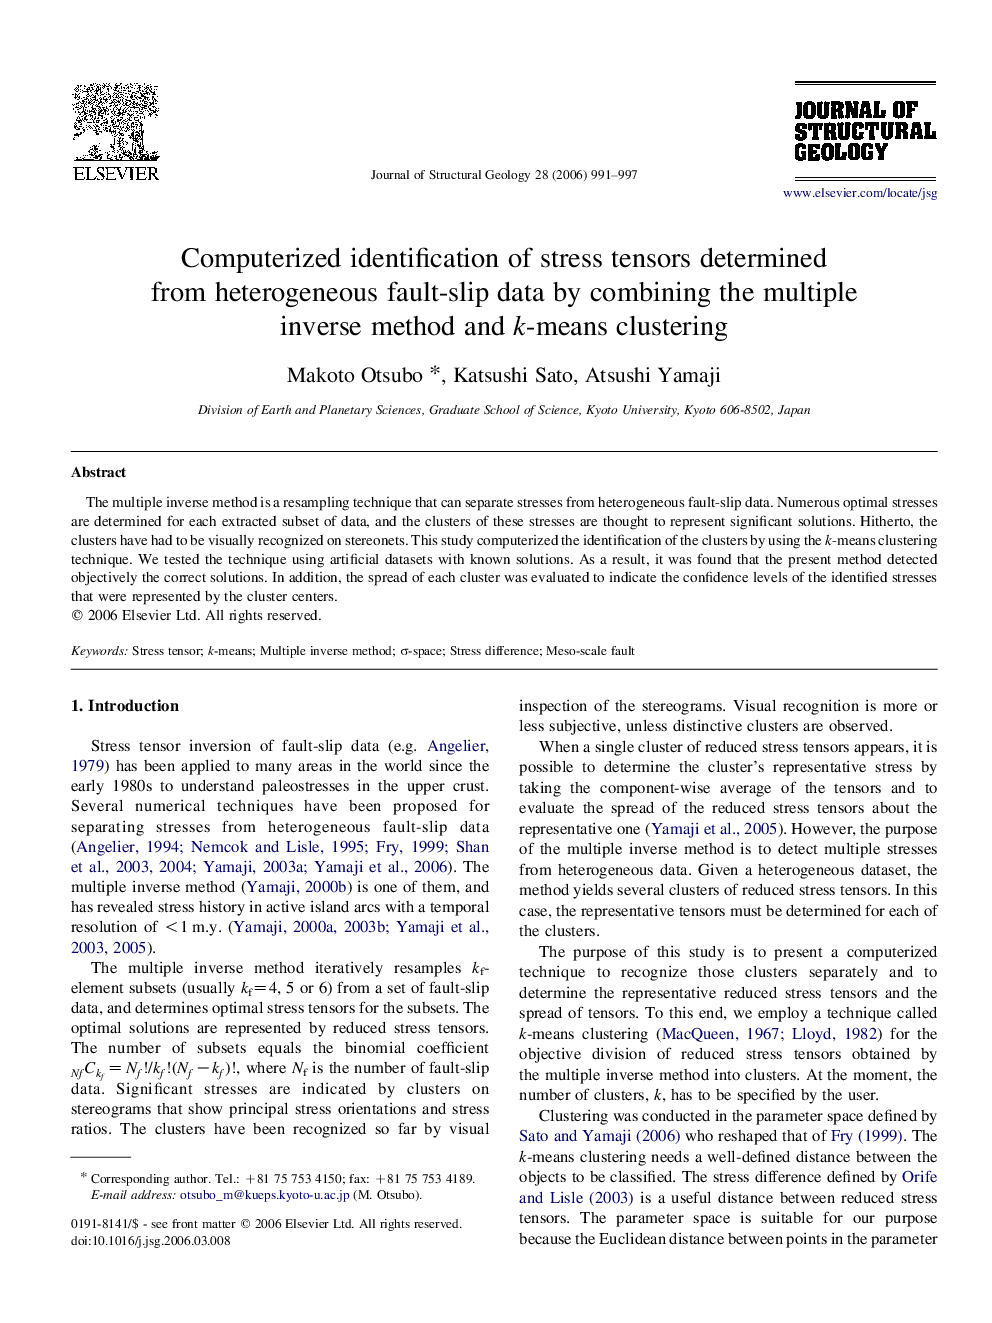 Computerized identification of stress tensors determined from heterogeneous fault-slip data by combining the multiple inverse method and k-means clustering